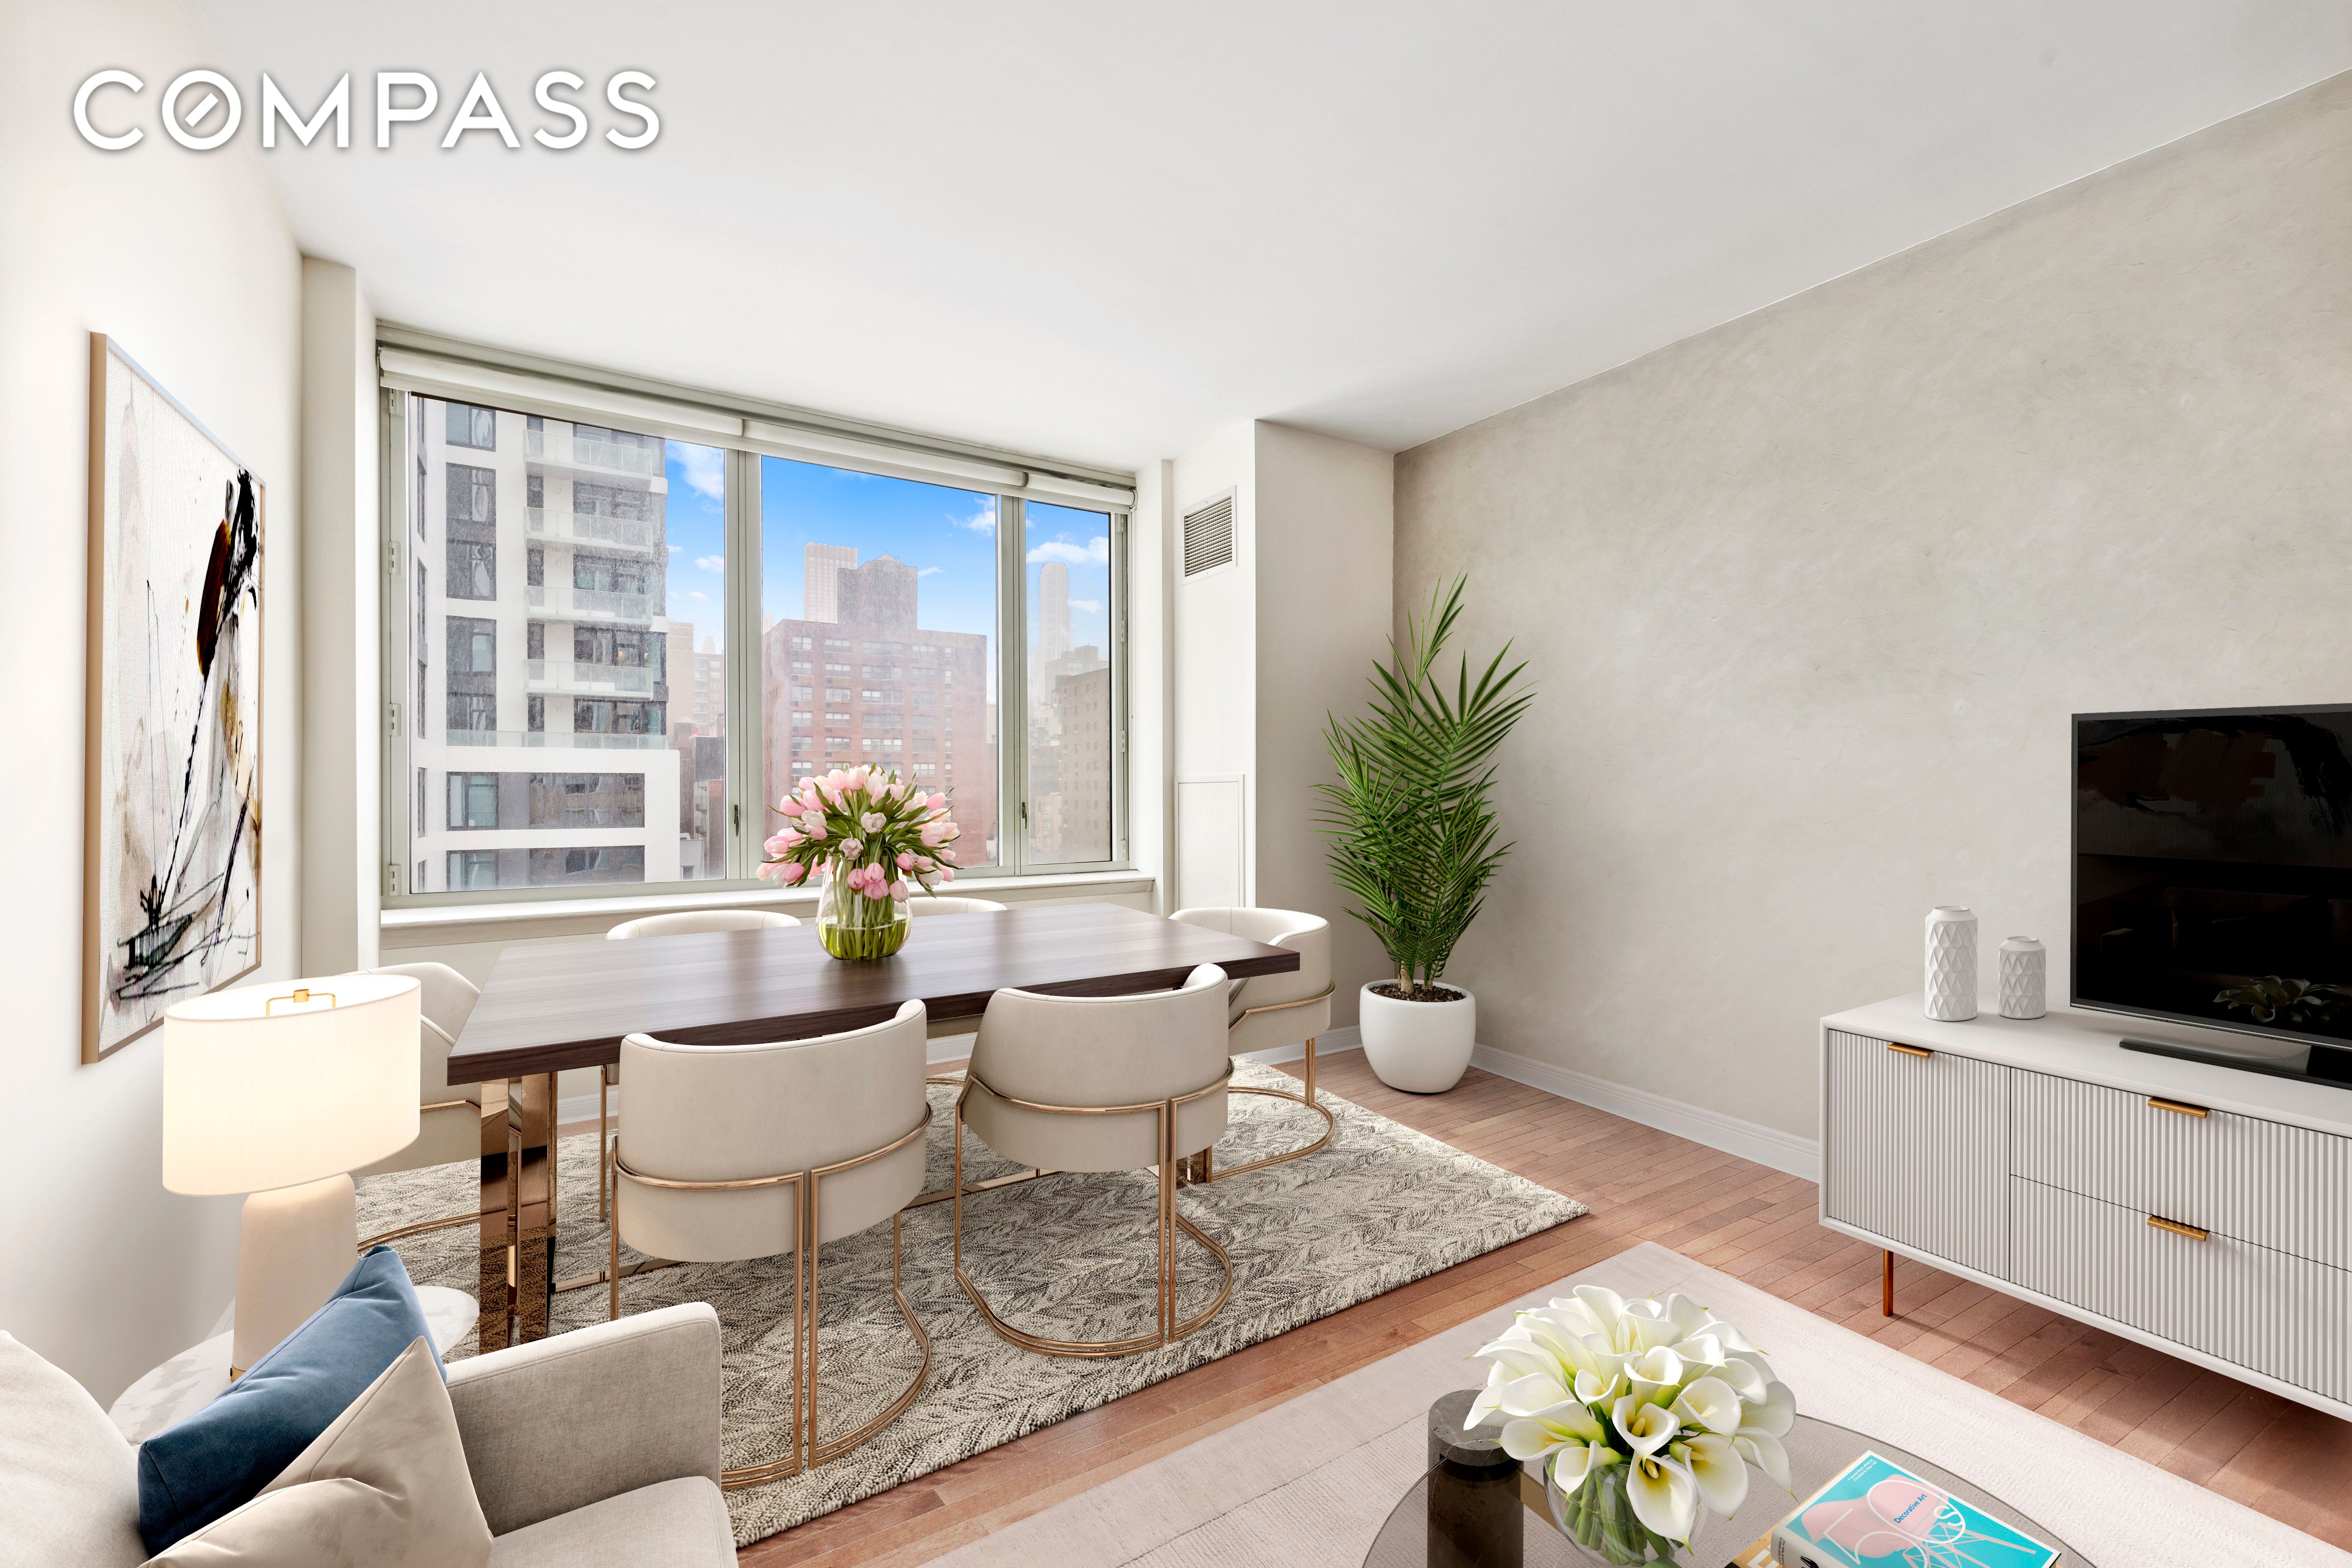 225 East 34th Street 9C, Murray Hill, Midtown East, NYC - 2 Bedrooms  
2 Bathrooms  
6 Rooms - 